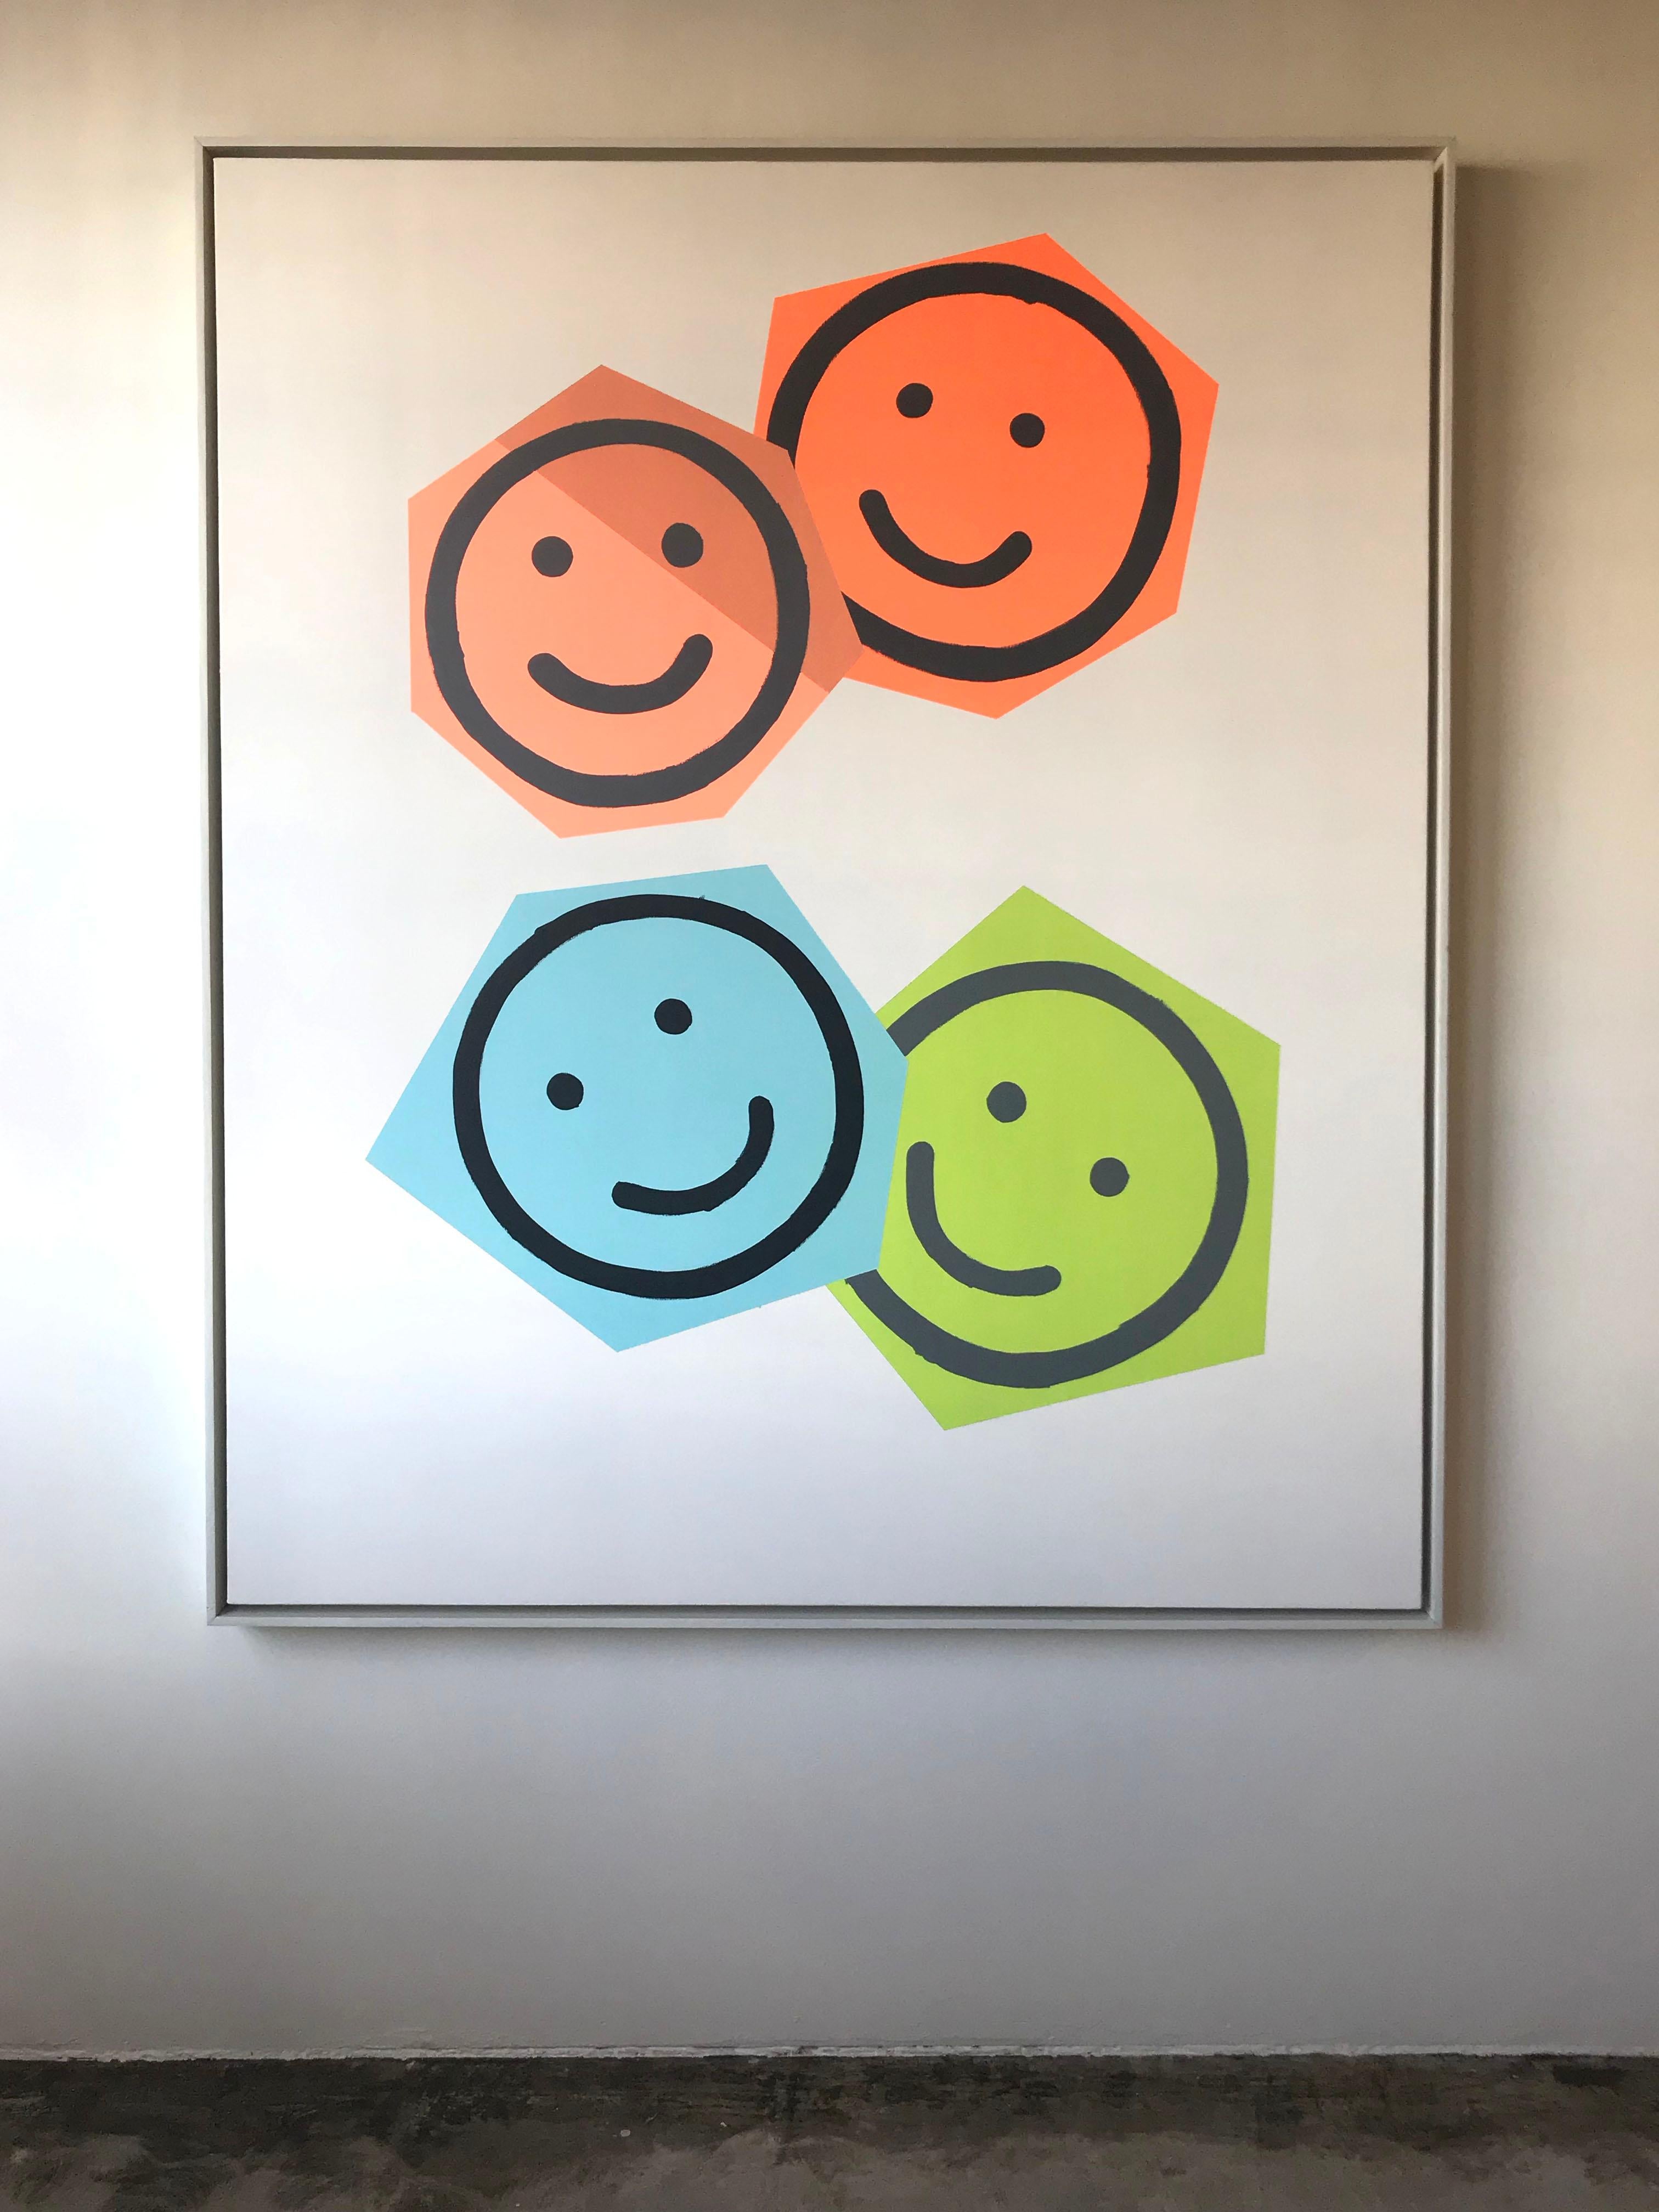 Family Portrait #5, Smile, Smiley Faces, Emoji, Shapes, Painting, Large, Happy